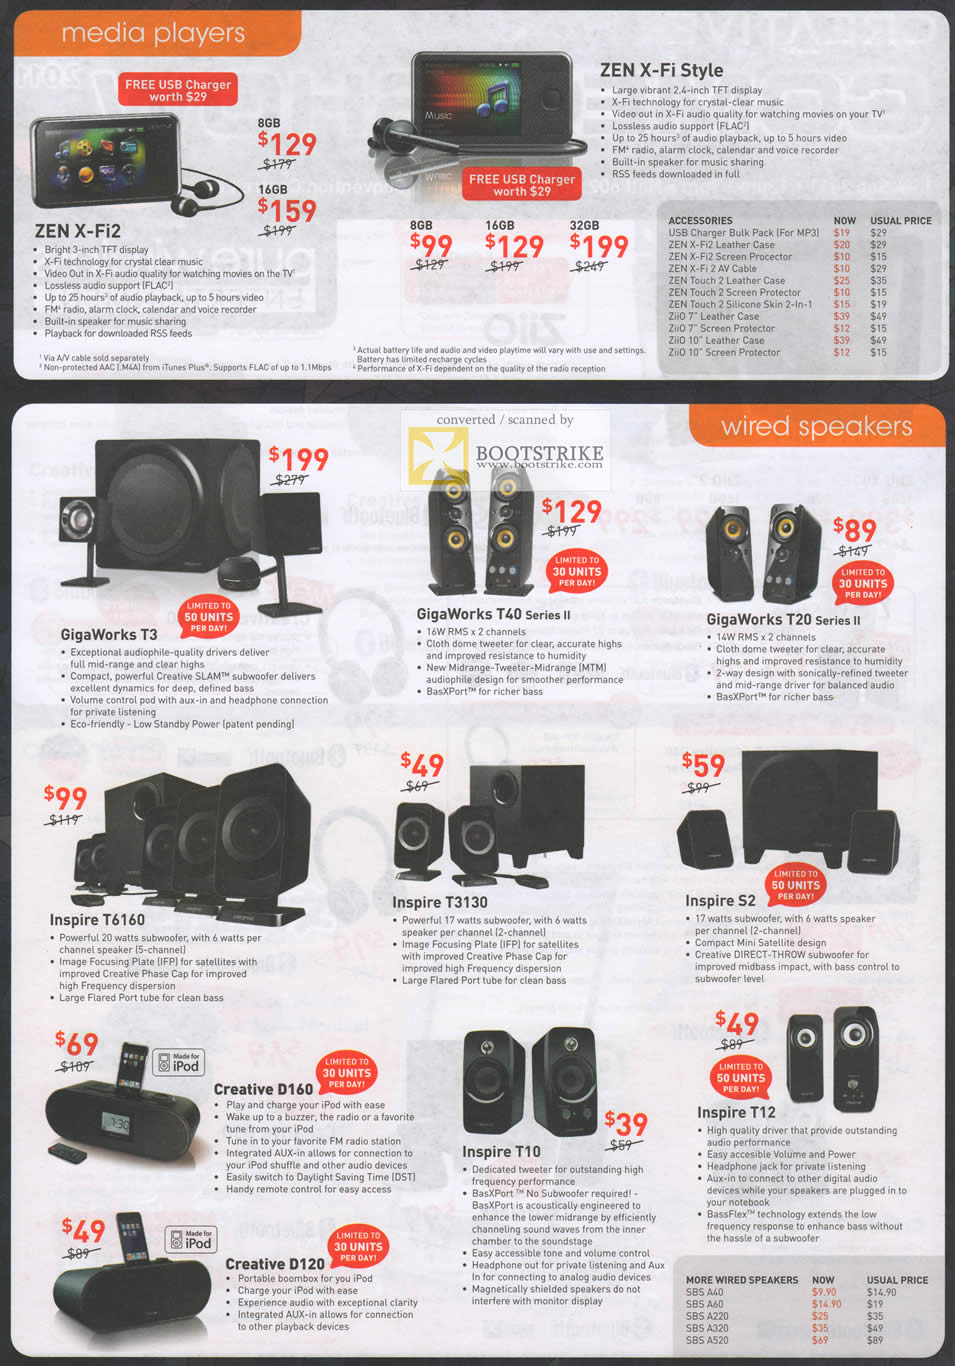 COMEX 2011 price list image brochure of Creative Media Player Zen X-Fi2 X-Fi Style Speakers GigaWorks T3 T40 Series II T20 Inspire T6160 T3130 S2 IPod Dock D160 D120 T10 T12 SBS A40 A60 A220 A320 A520